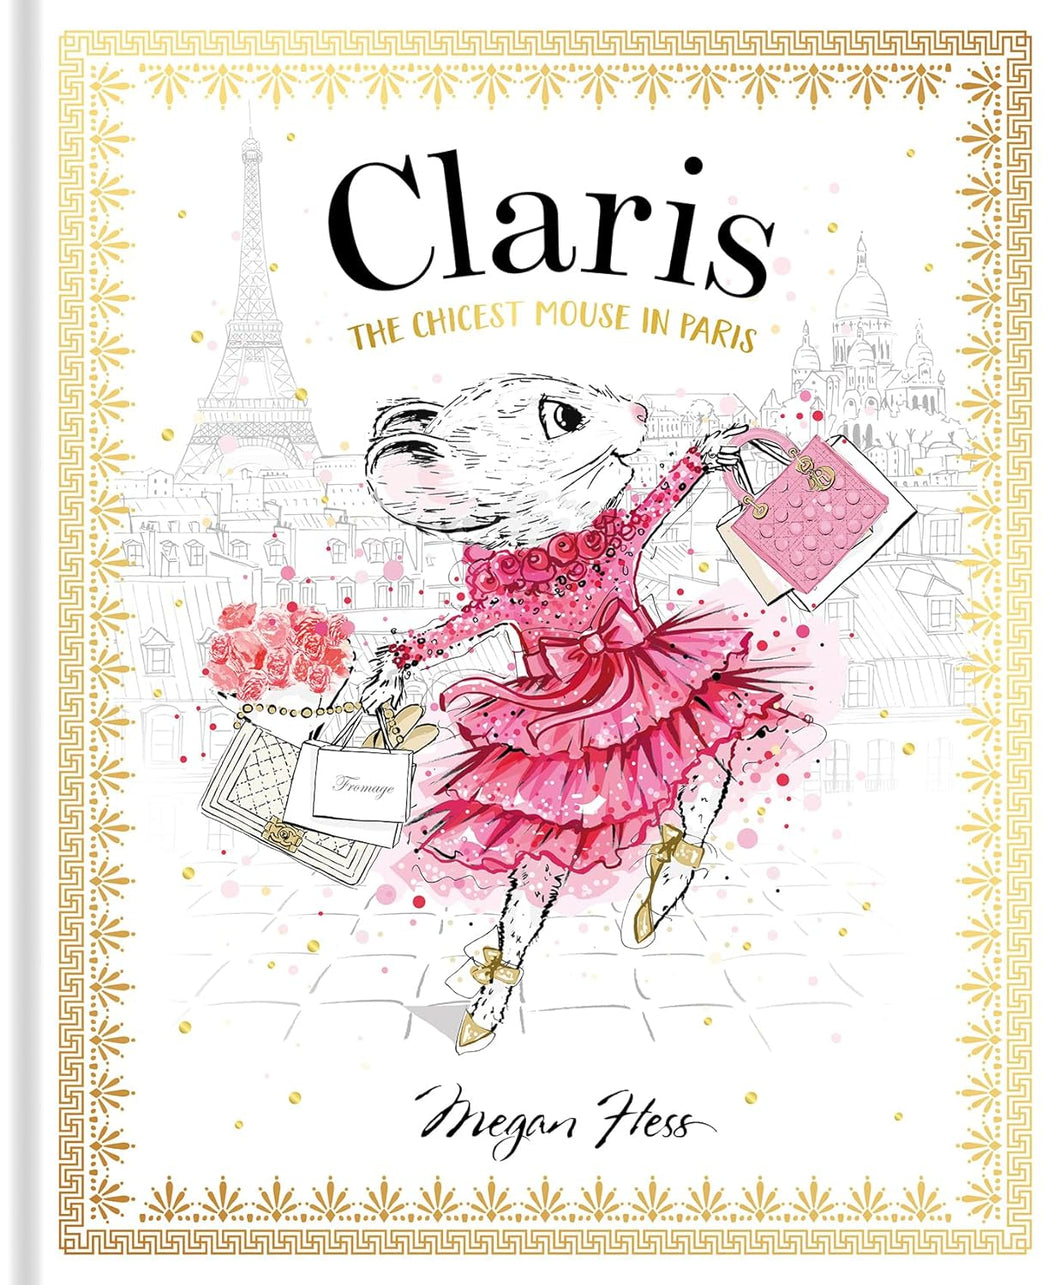 Claris, The Chicest Mouse in Paris